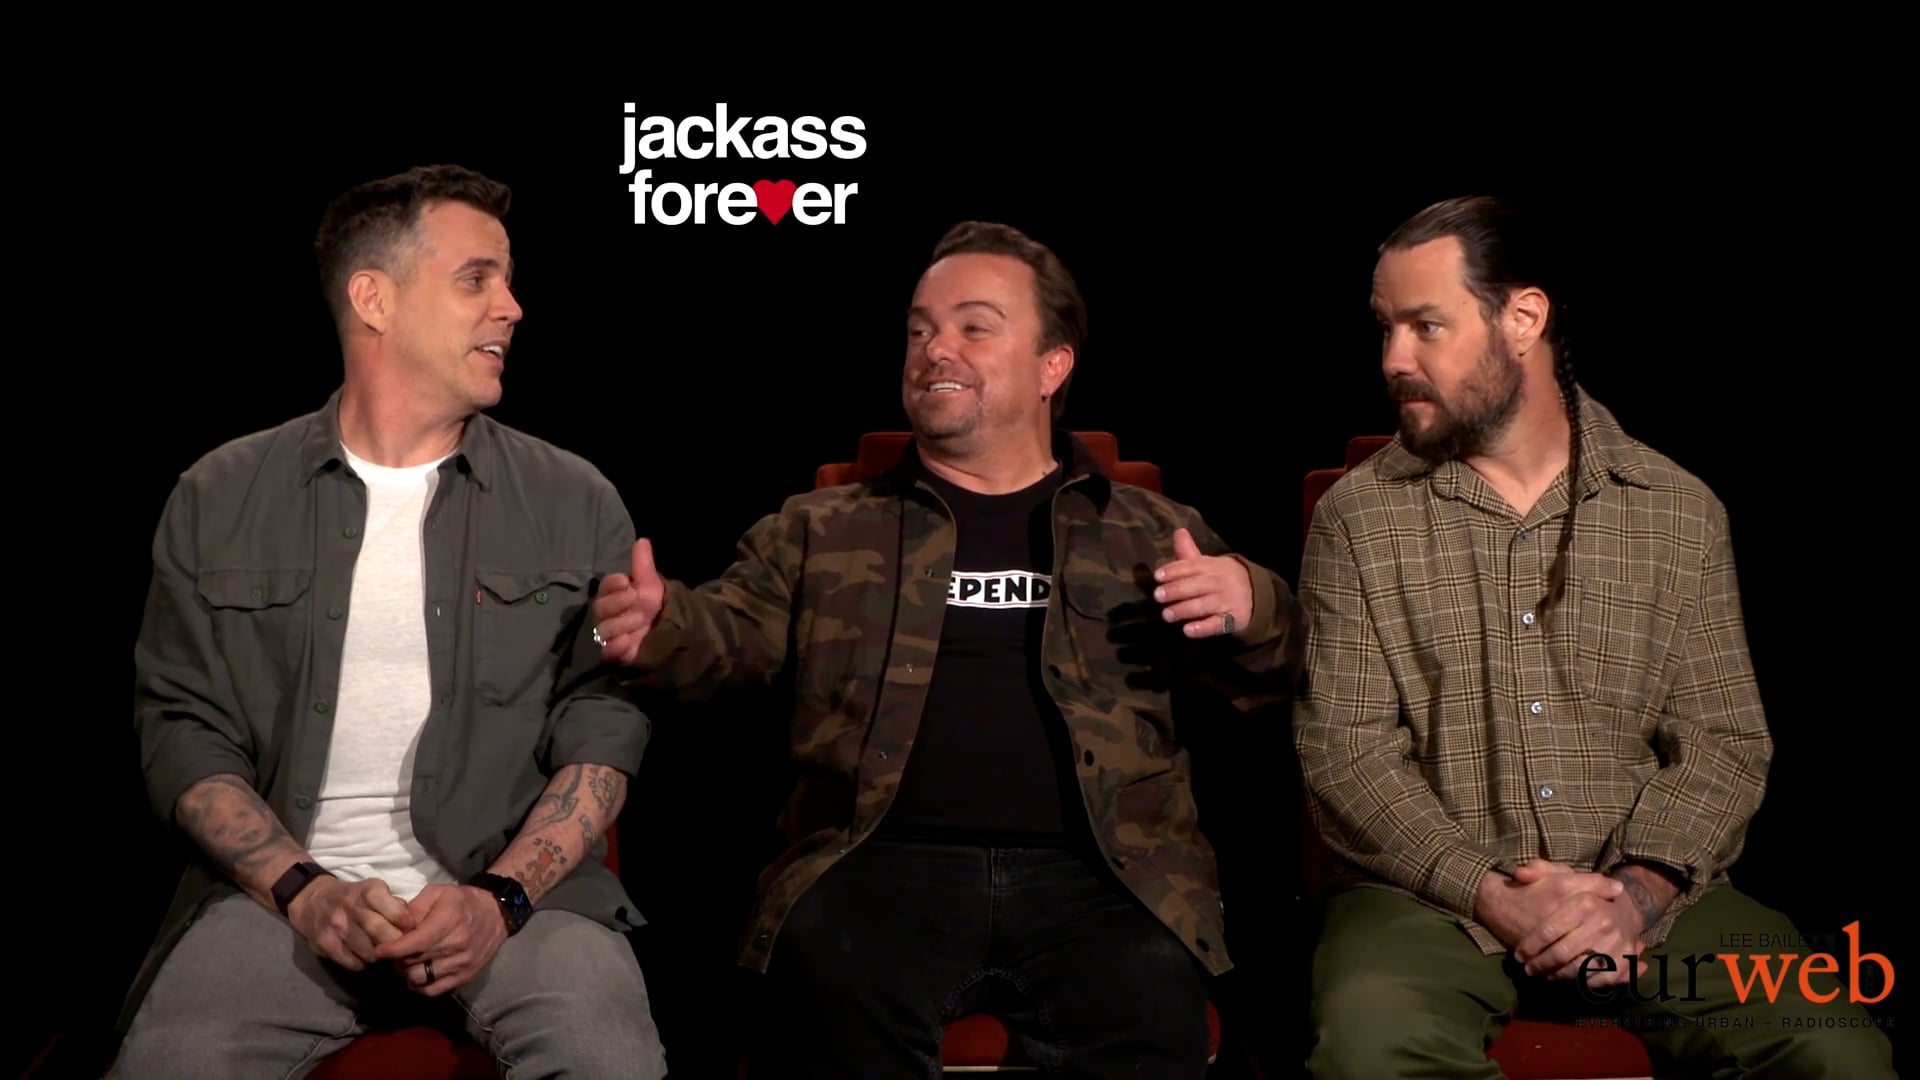 EUR Jackass Forever Steve-O, Wee Man and Chris Pontius on Vimeo